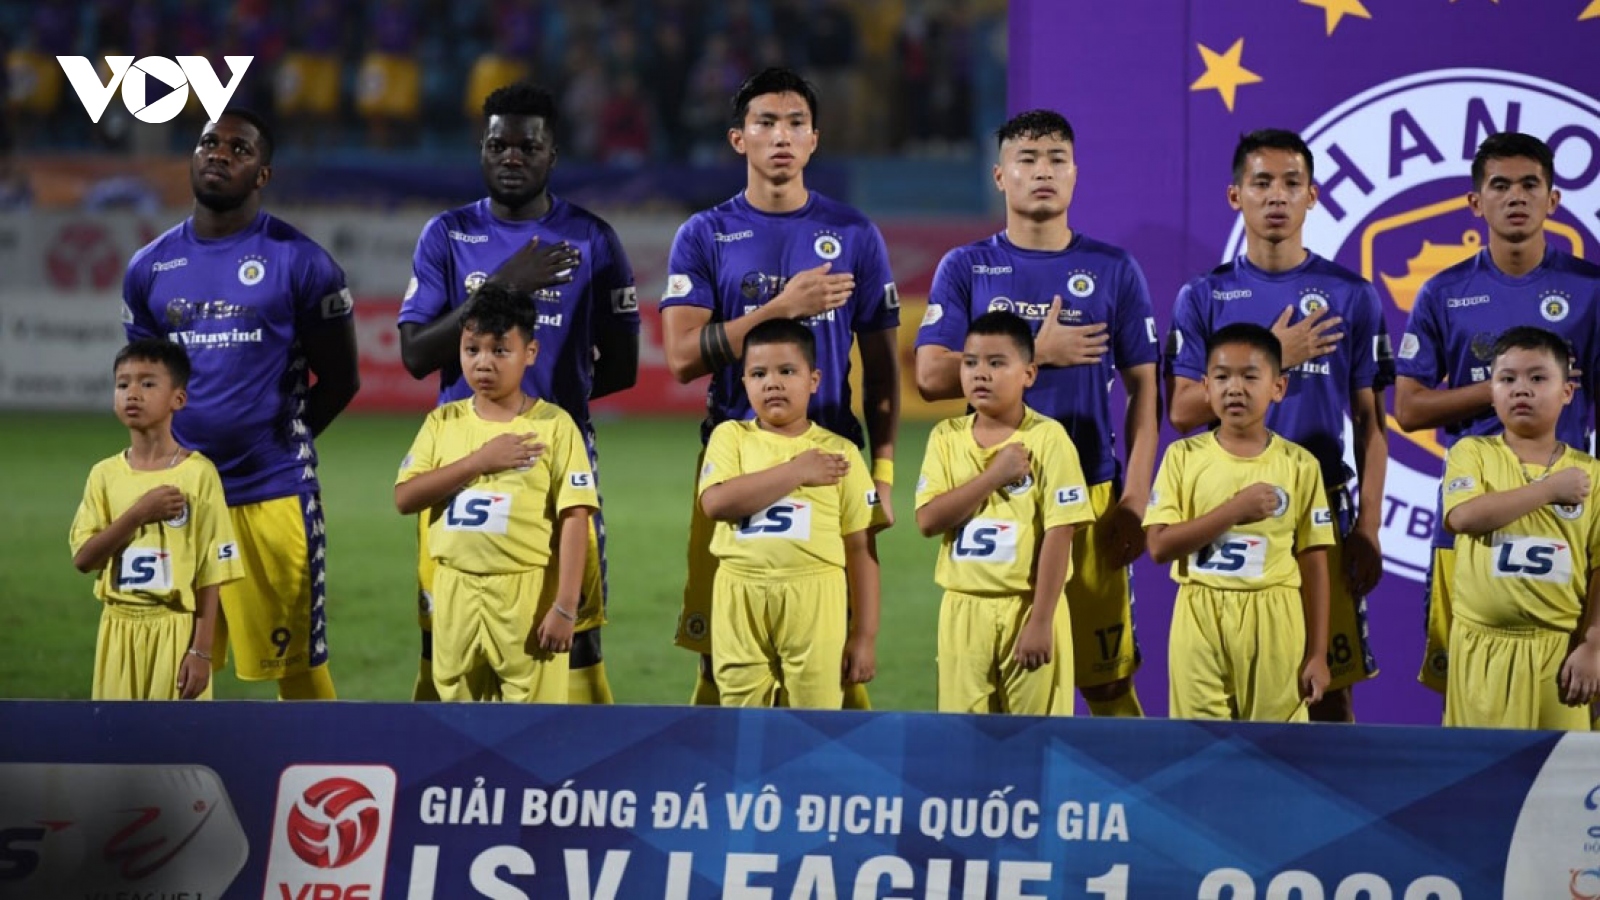 Hanoi FC named among ASEAN clubs with highest market value